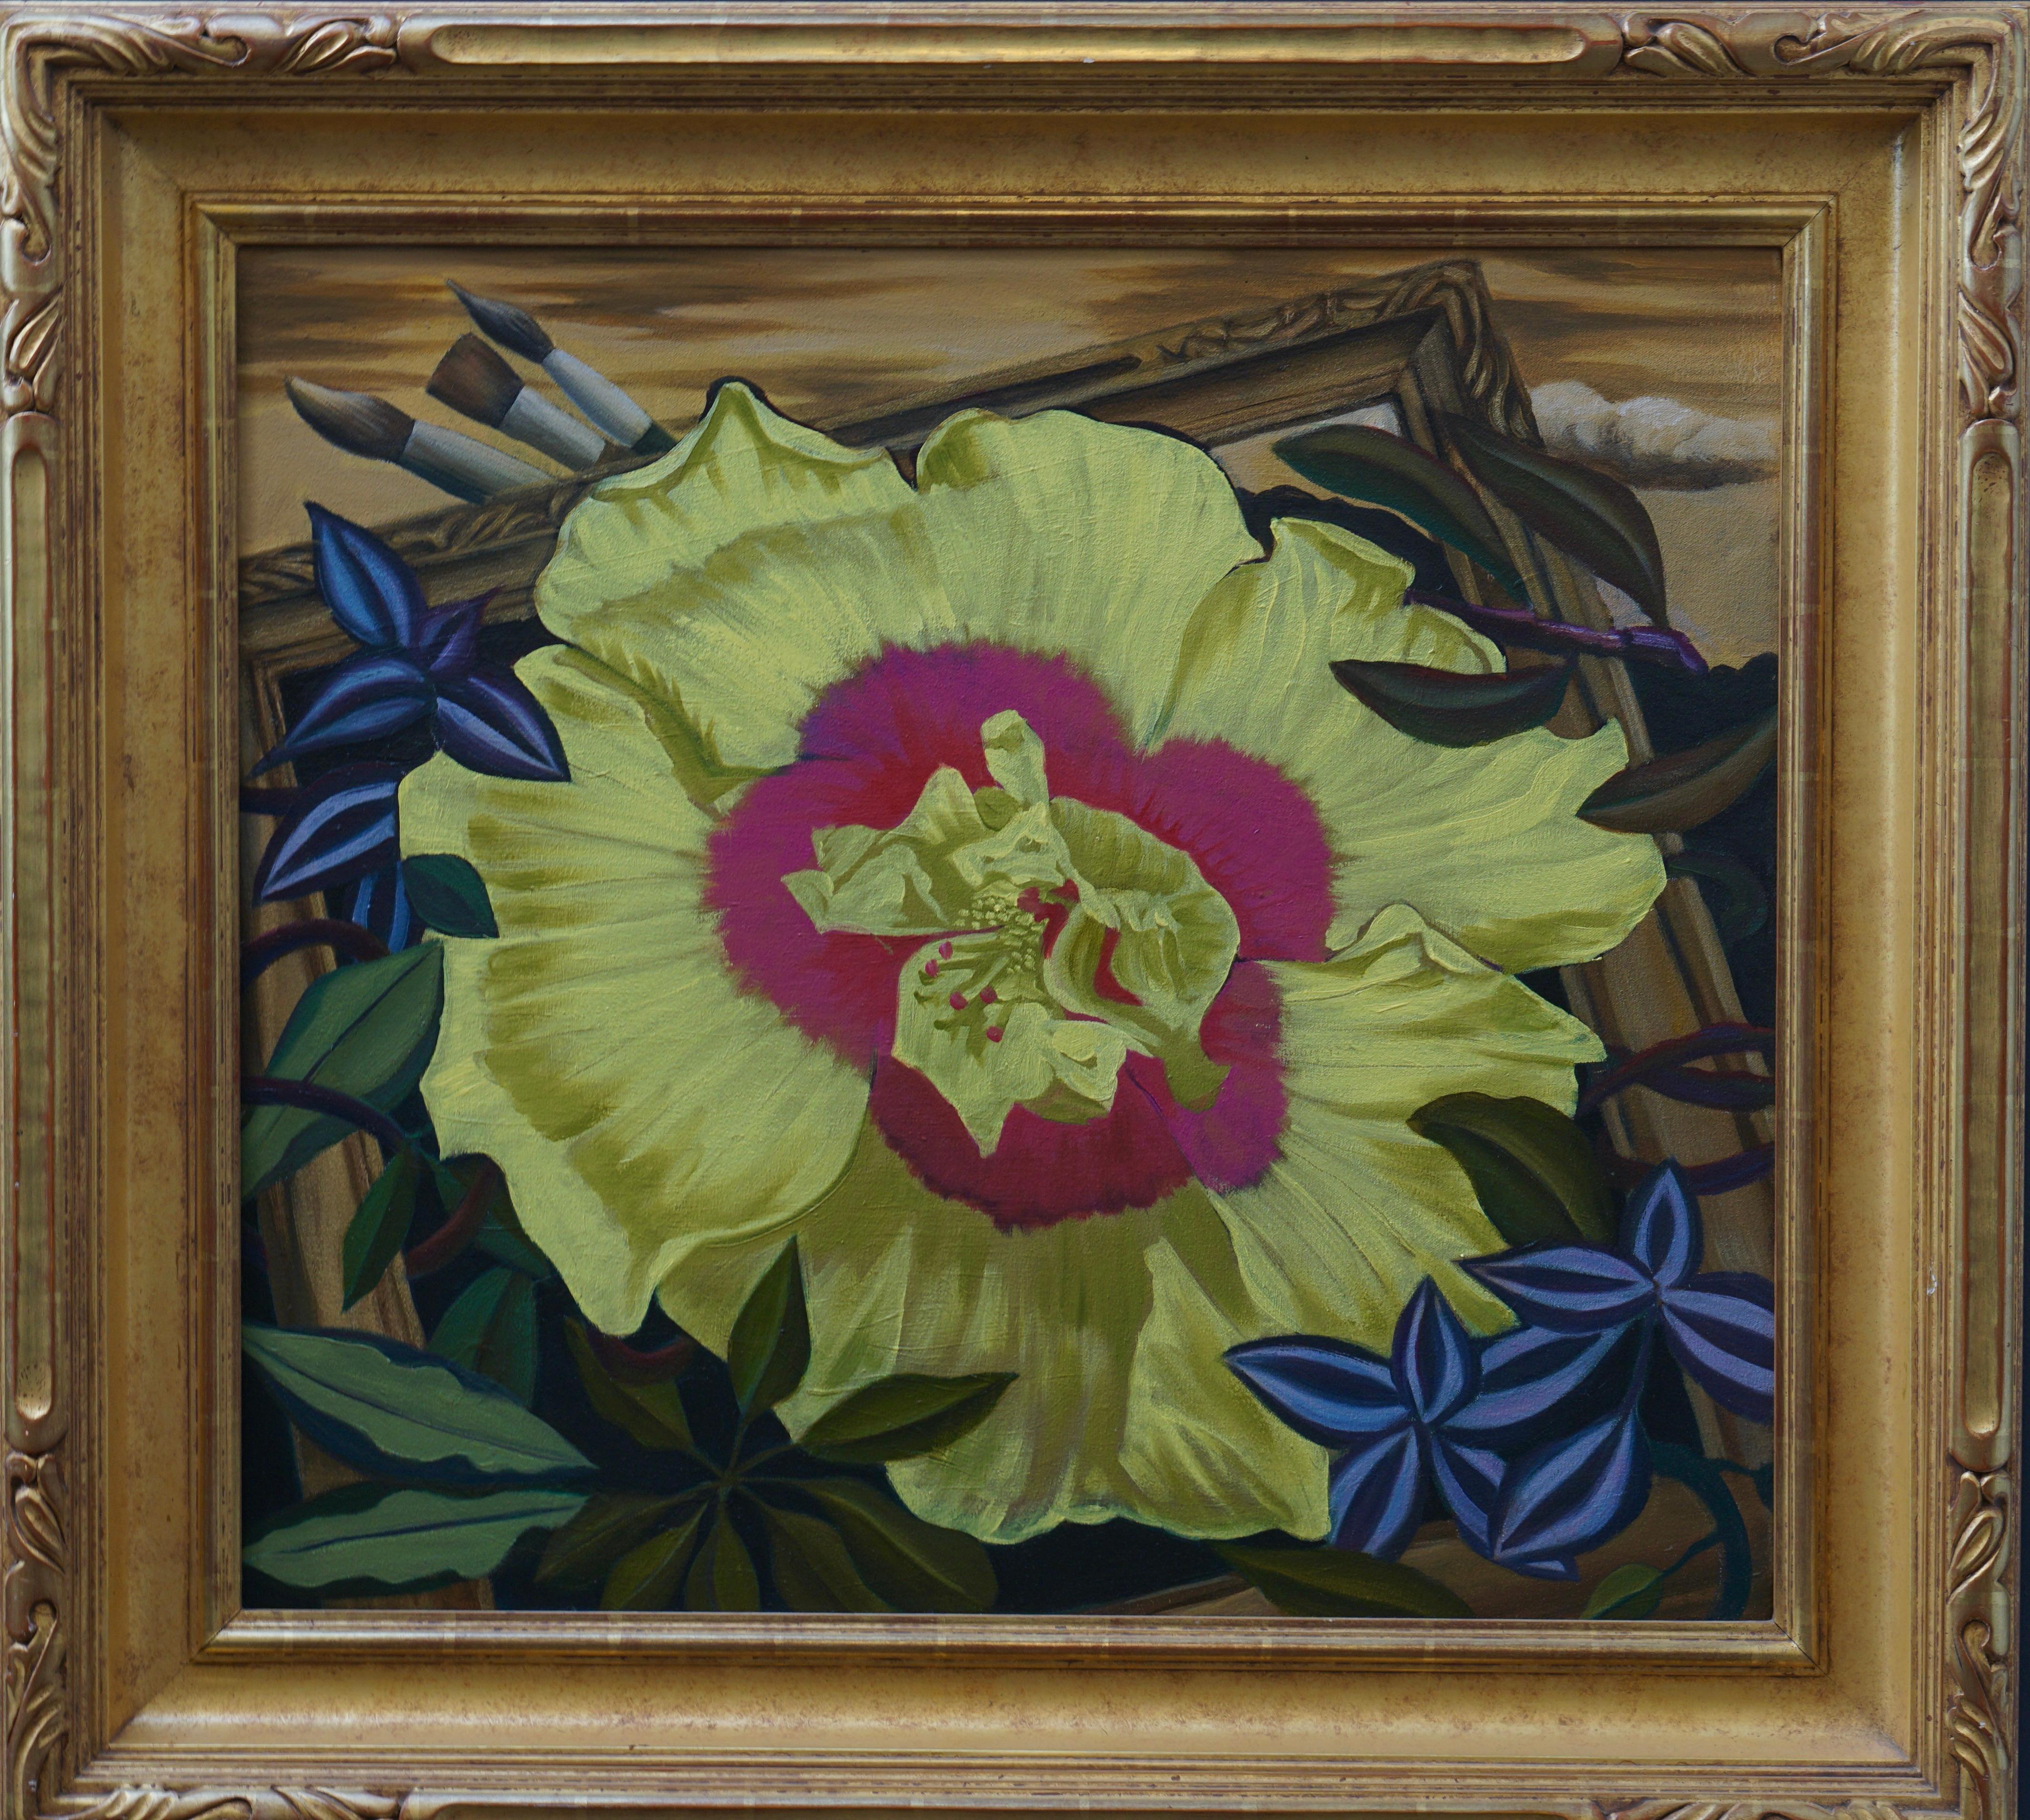 Bright yellow poppy subtly shaded with a hot pink center surrounded by richly ornate dark leaves setting off the poppy. A frame contains it with the artists brushes appearing in the background.
Gold leaf frame included. Valued at  $900.

Yellow